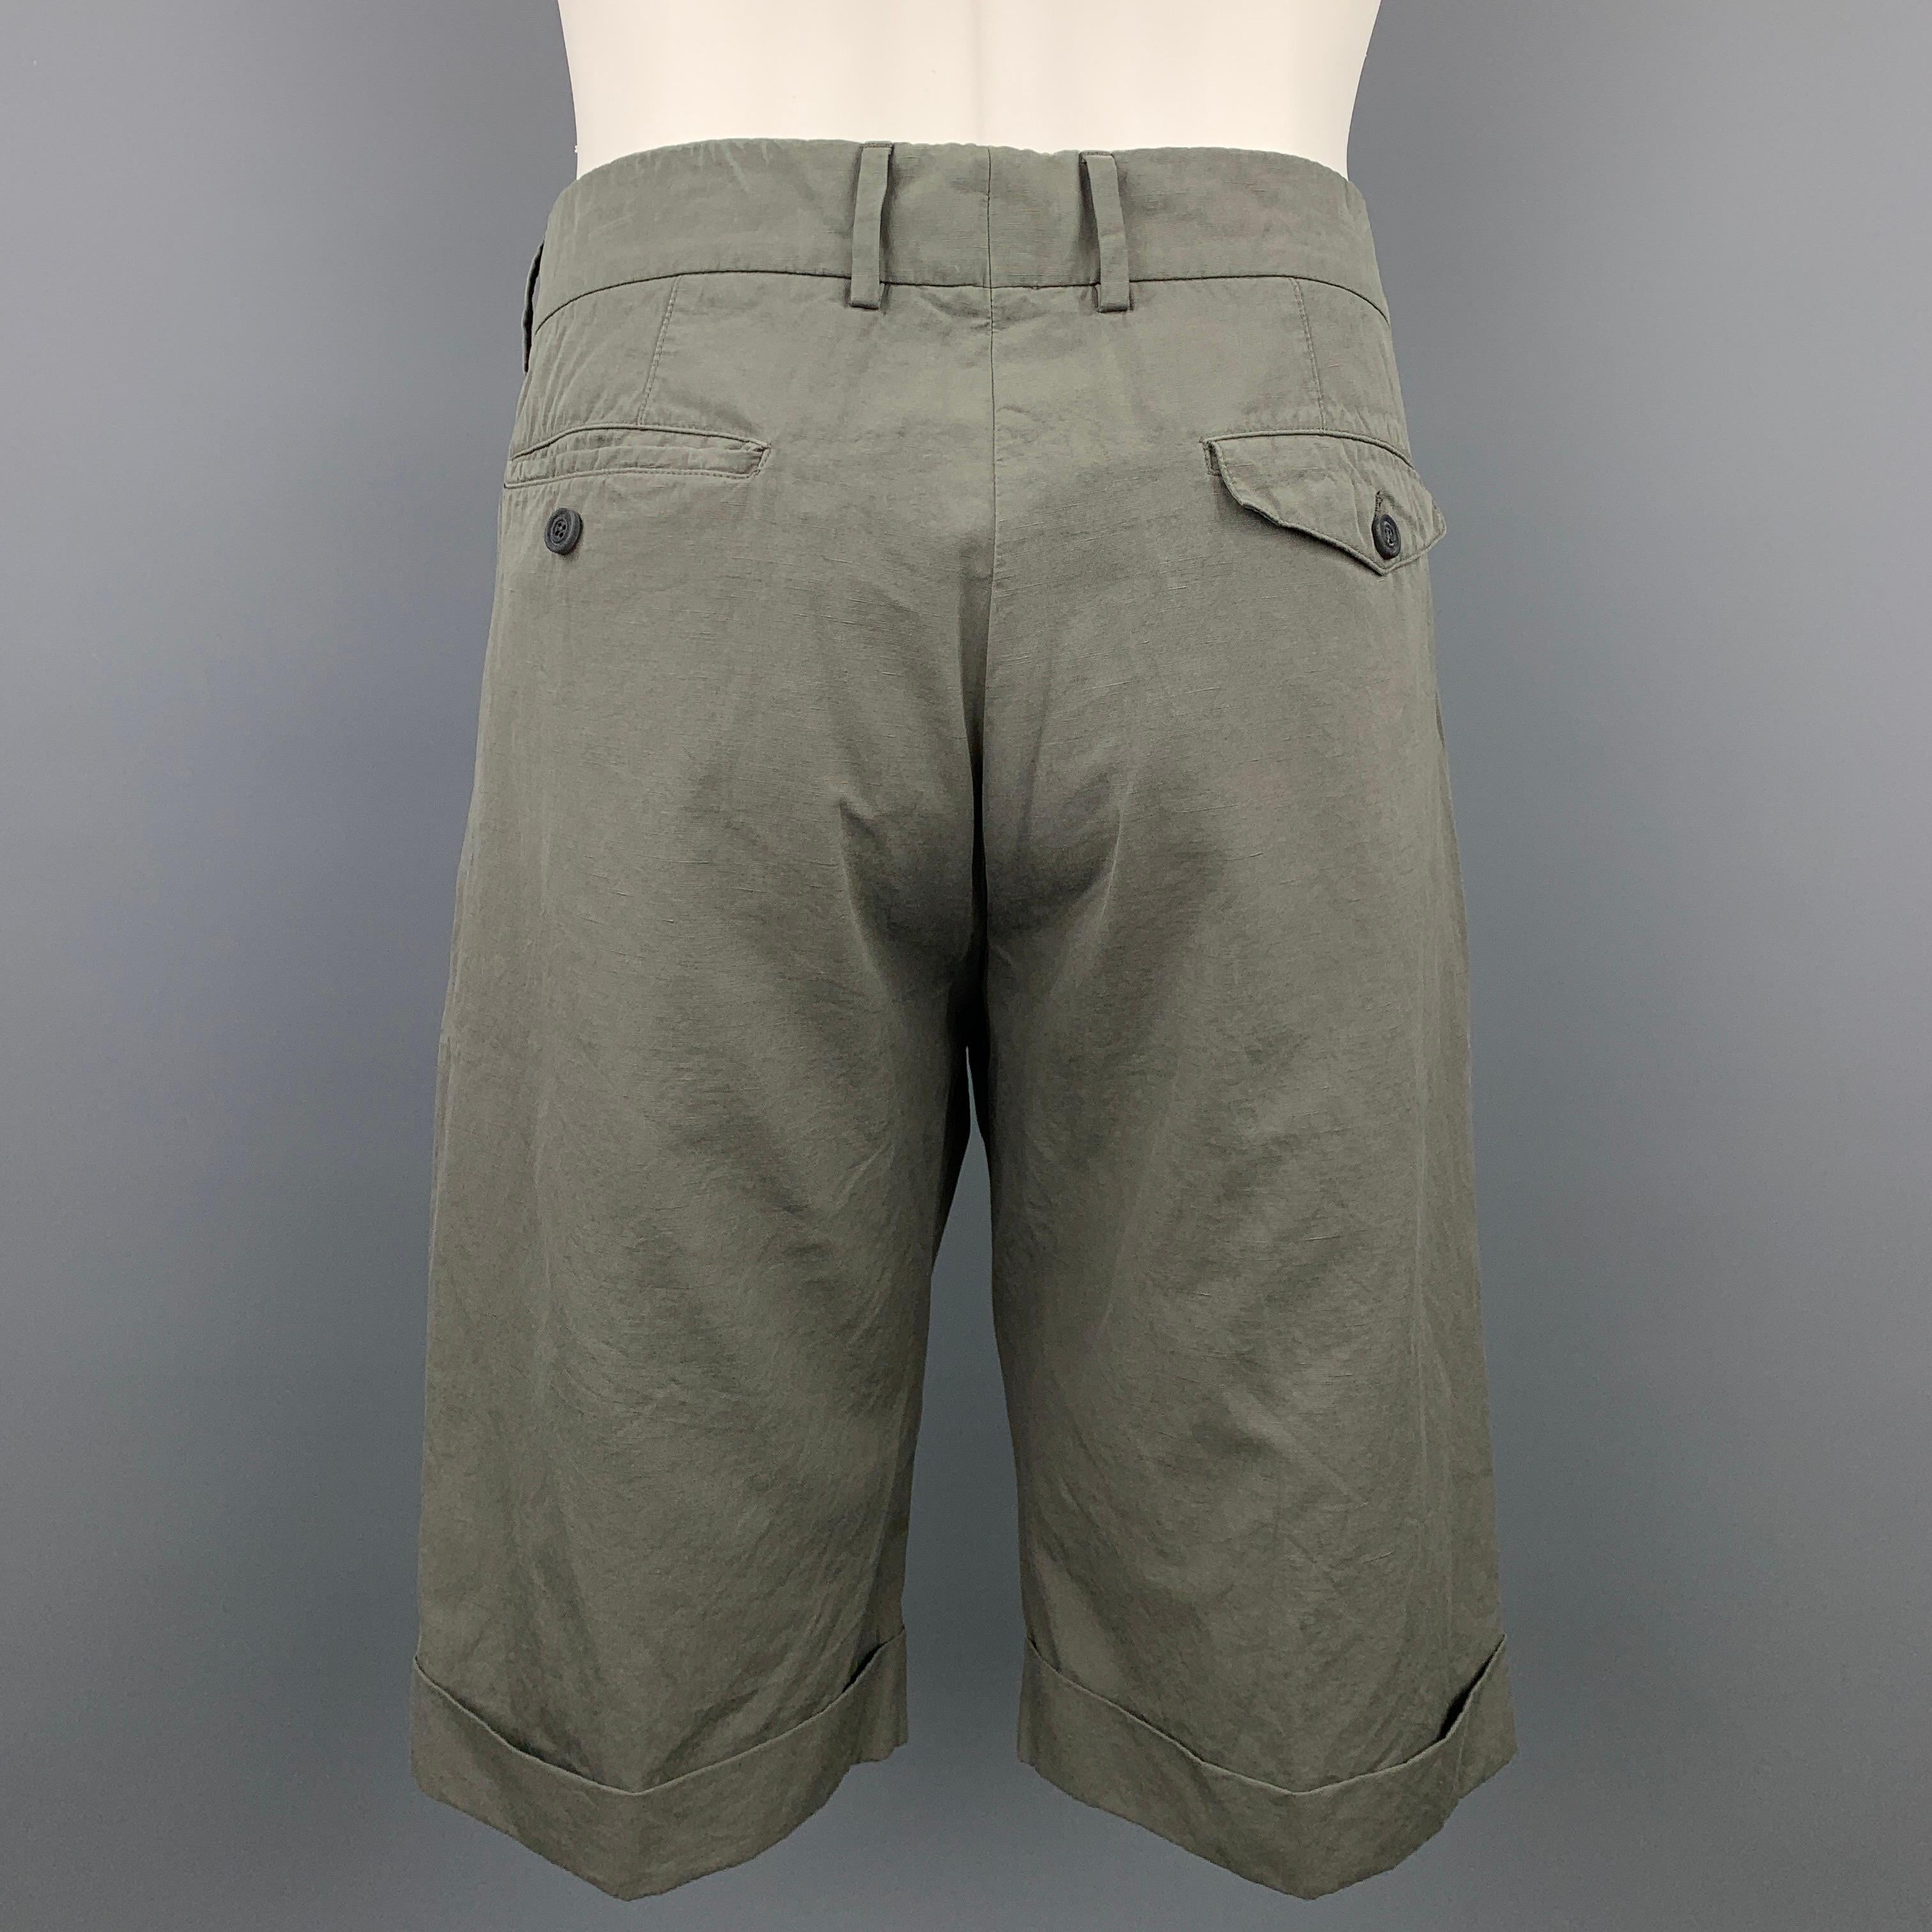 WOOSTER + LARDINI shorts comes in a olive cotton featuring a pleated style, belted, cuffed leg, front tab, and a button fly closure. Made in Italy.

Very Good Pre-Owned Condition.
Marked: 48

Measurements:

Waist: 34 in.
Rise: 11 in.
Inseam: 14 in.